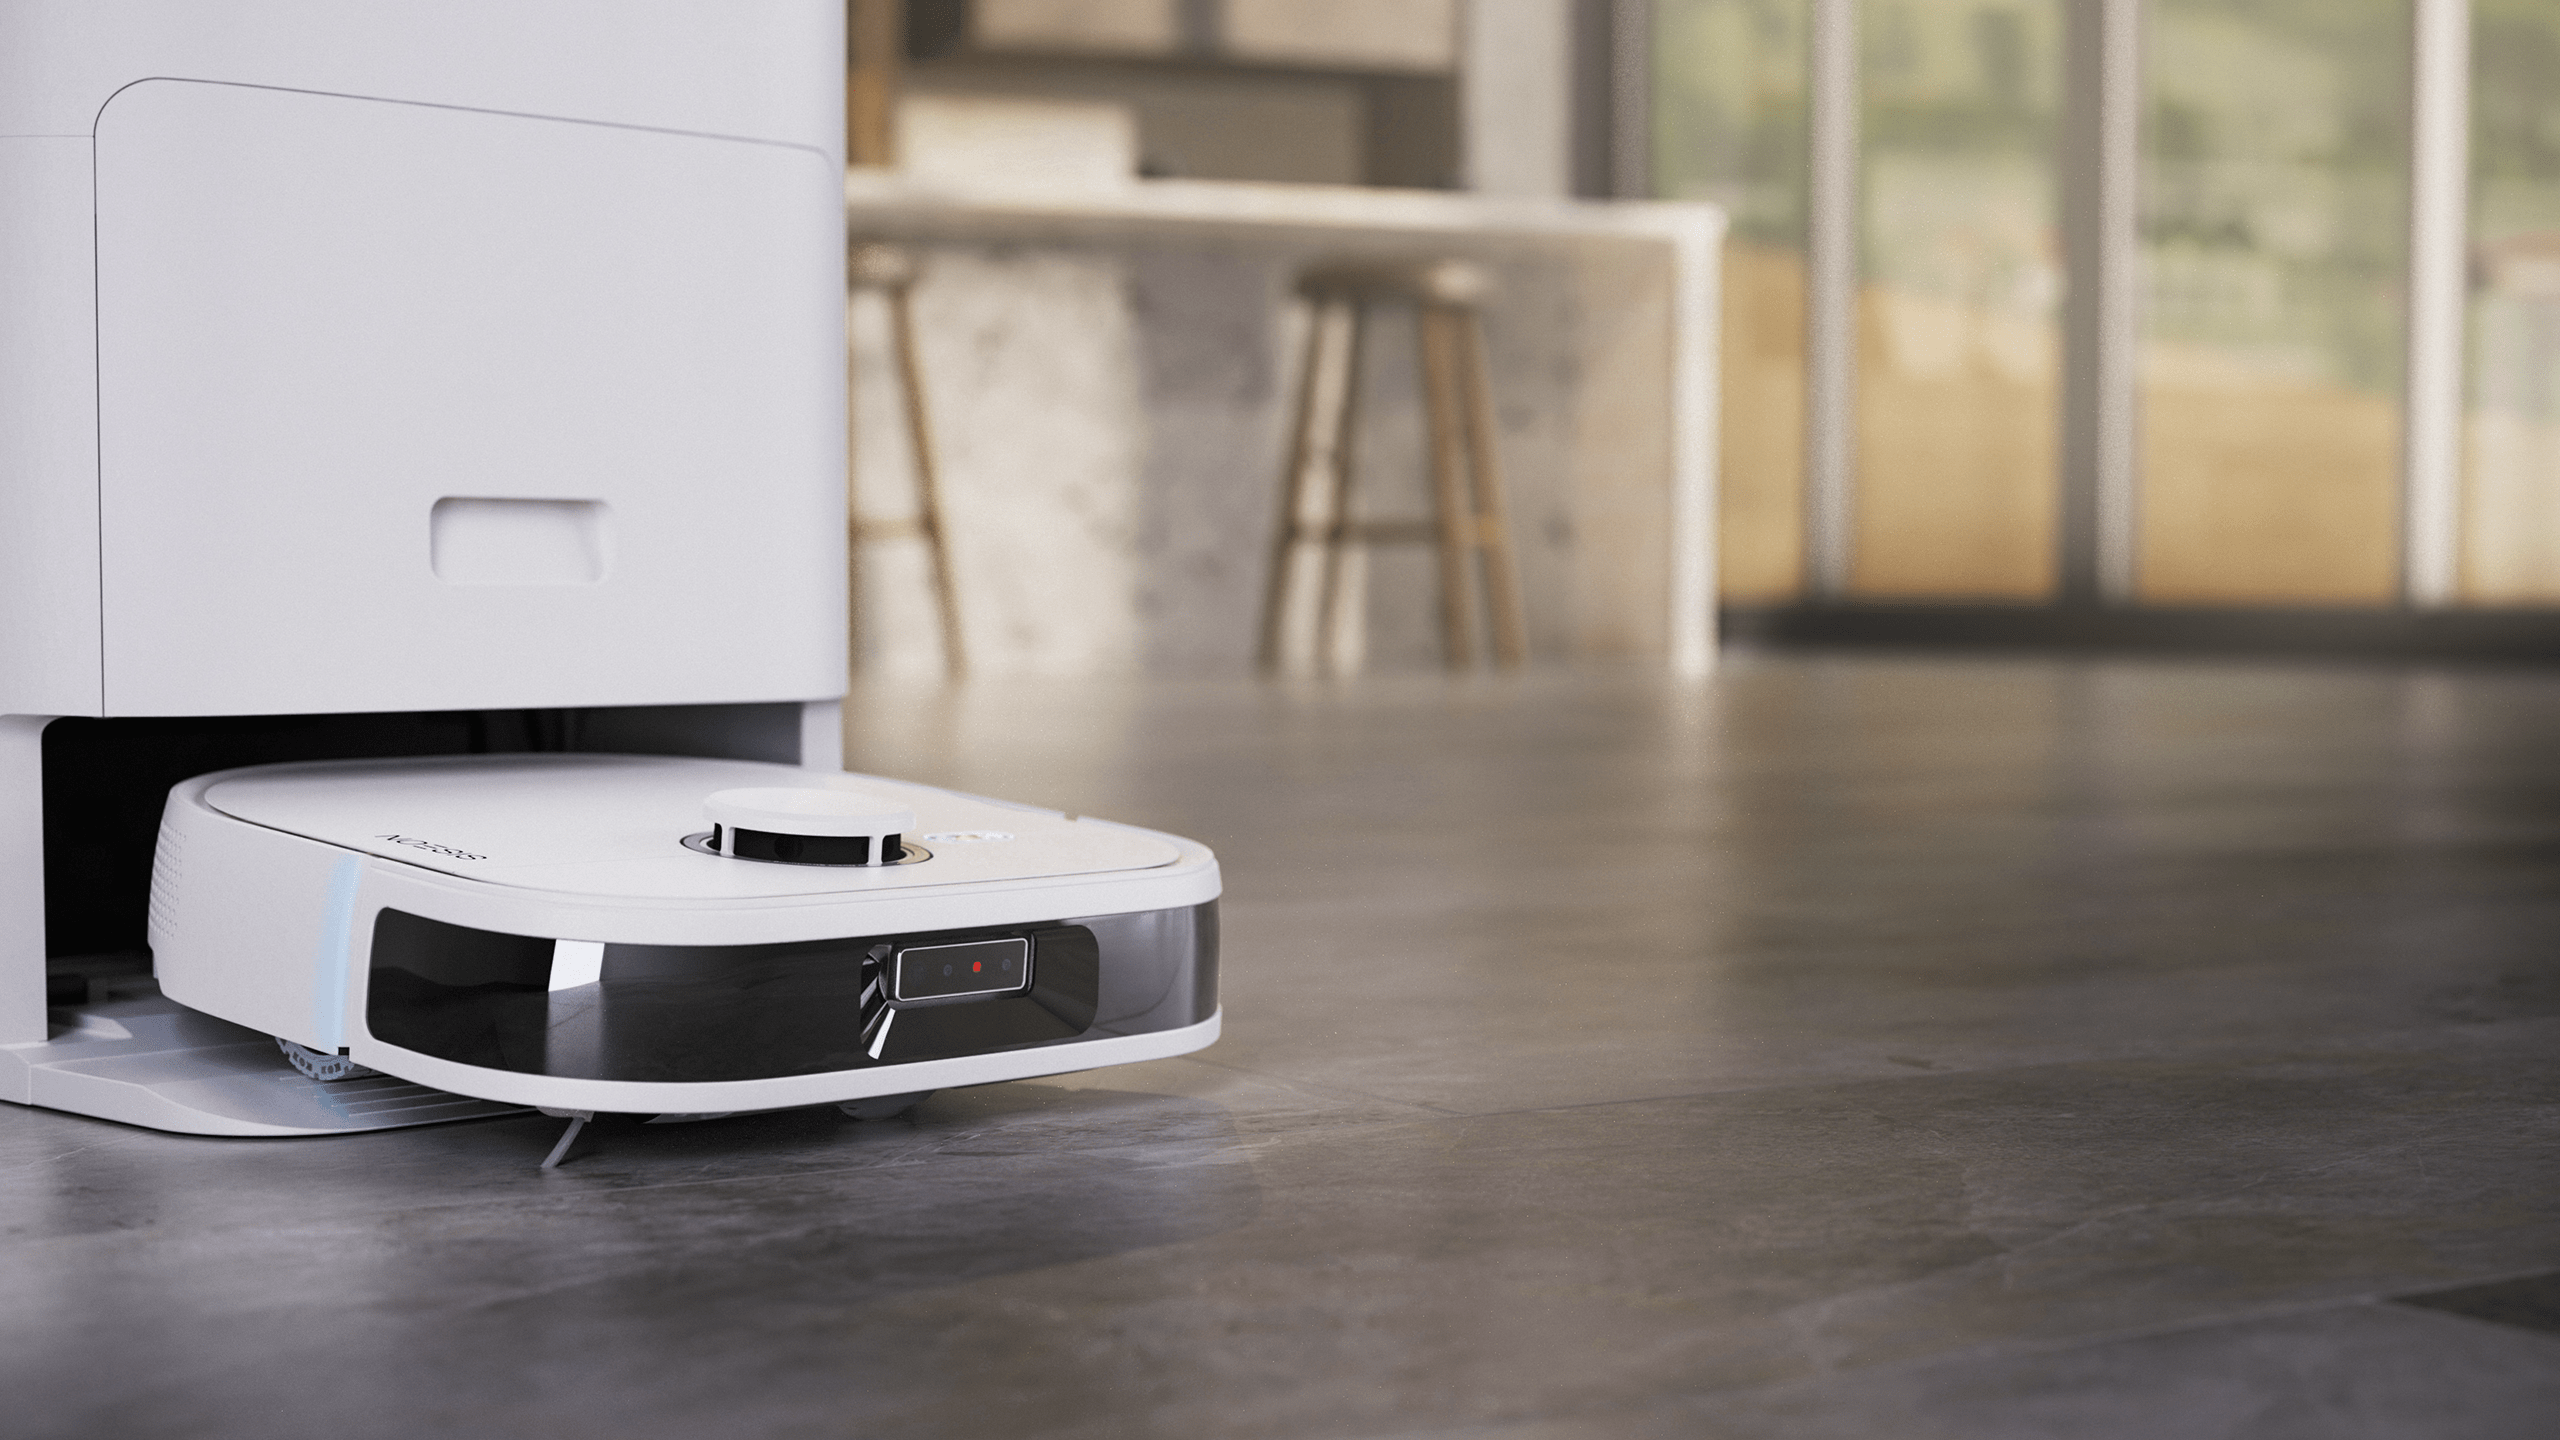 Noesis Robot and dock on hard floors in a home